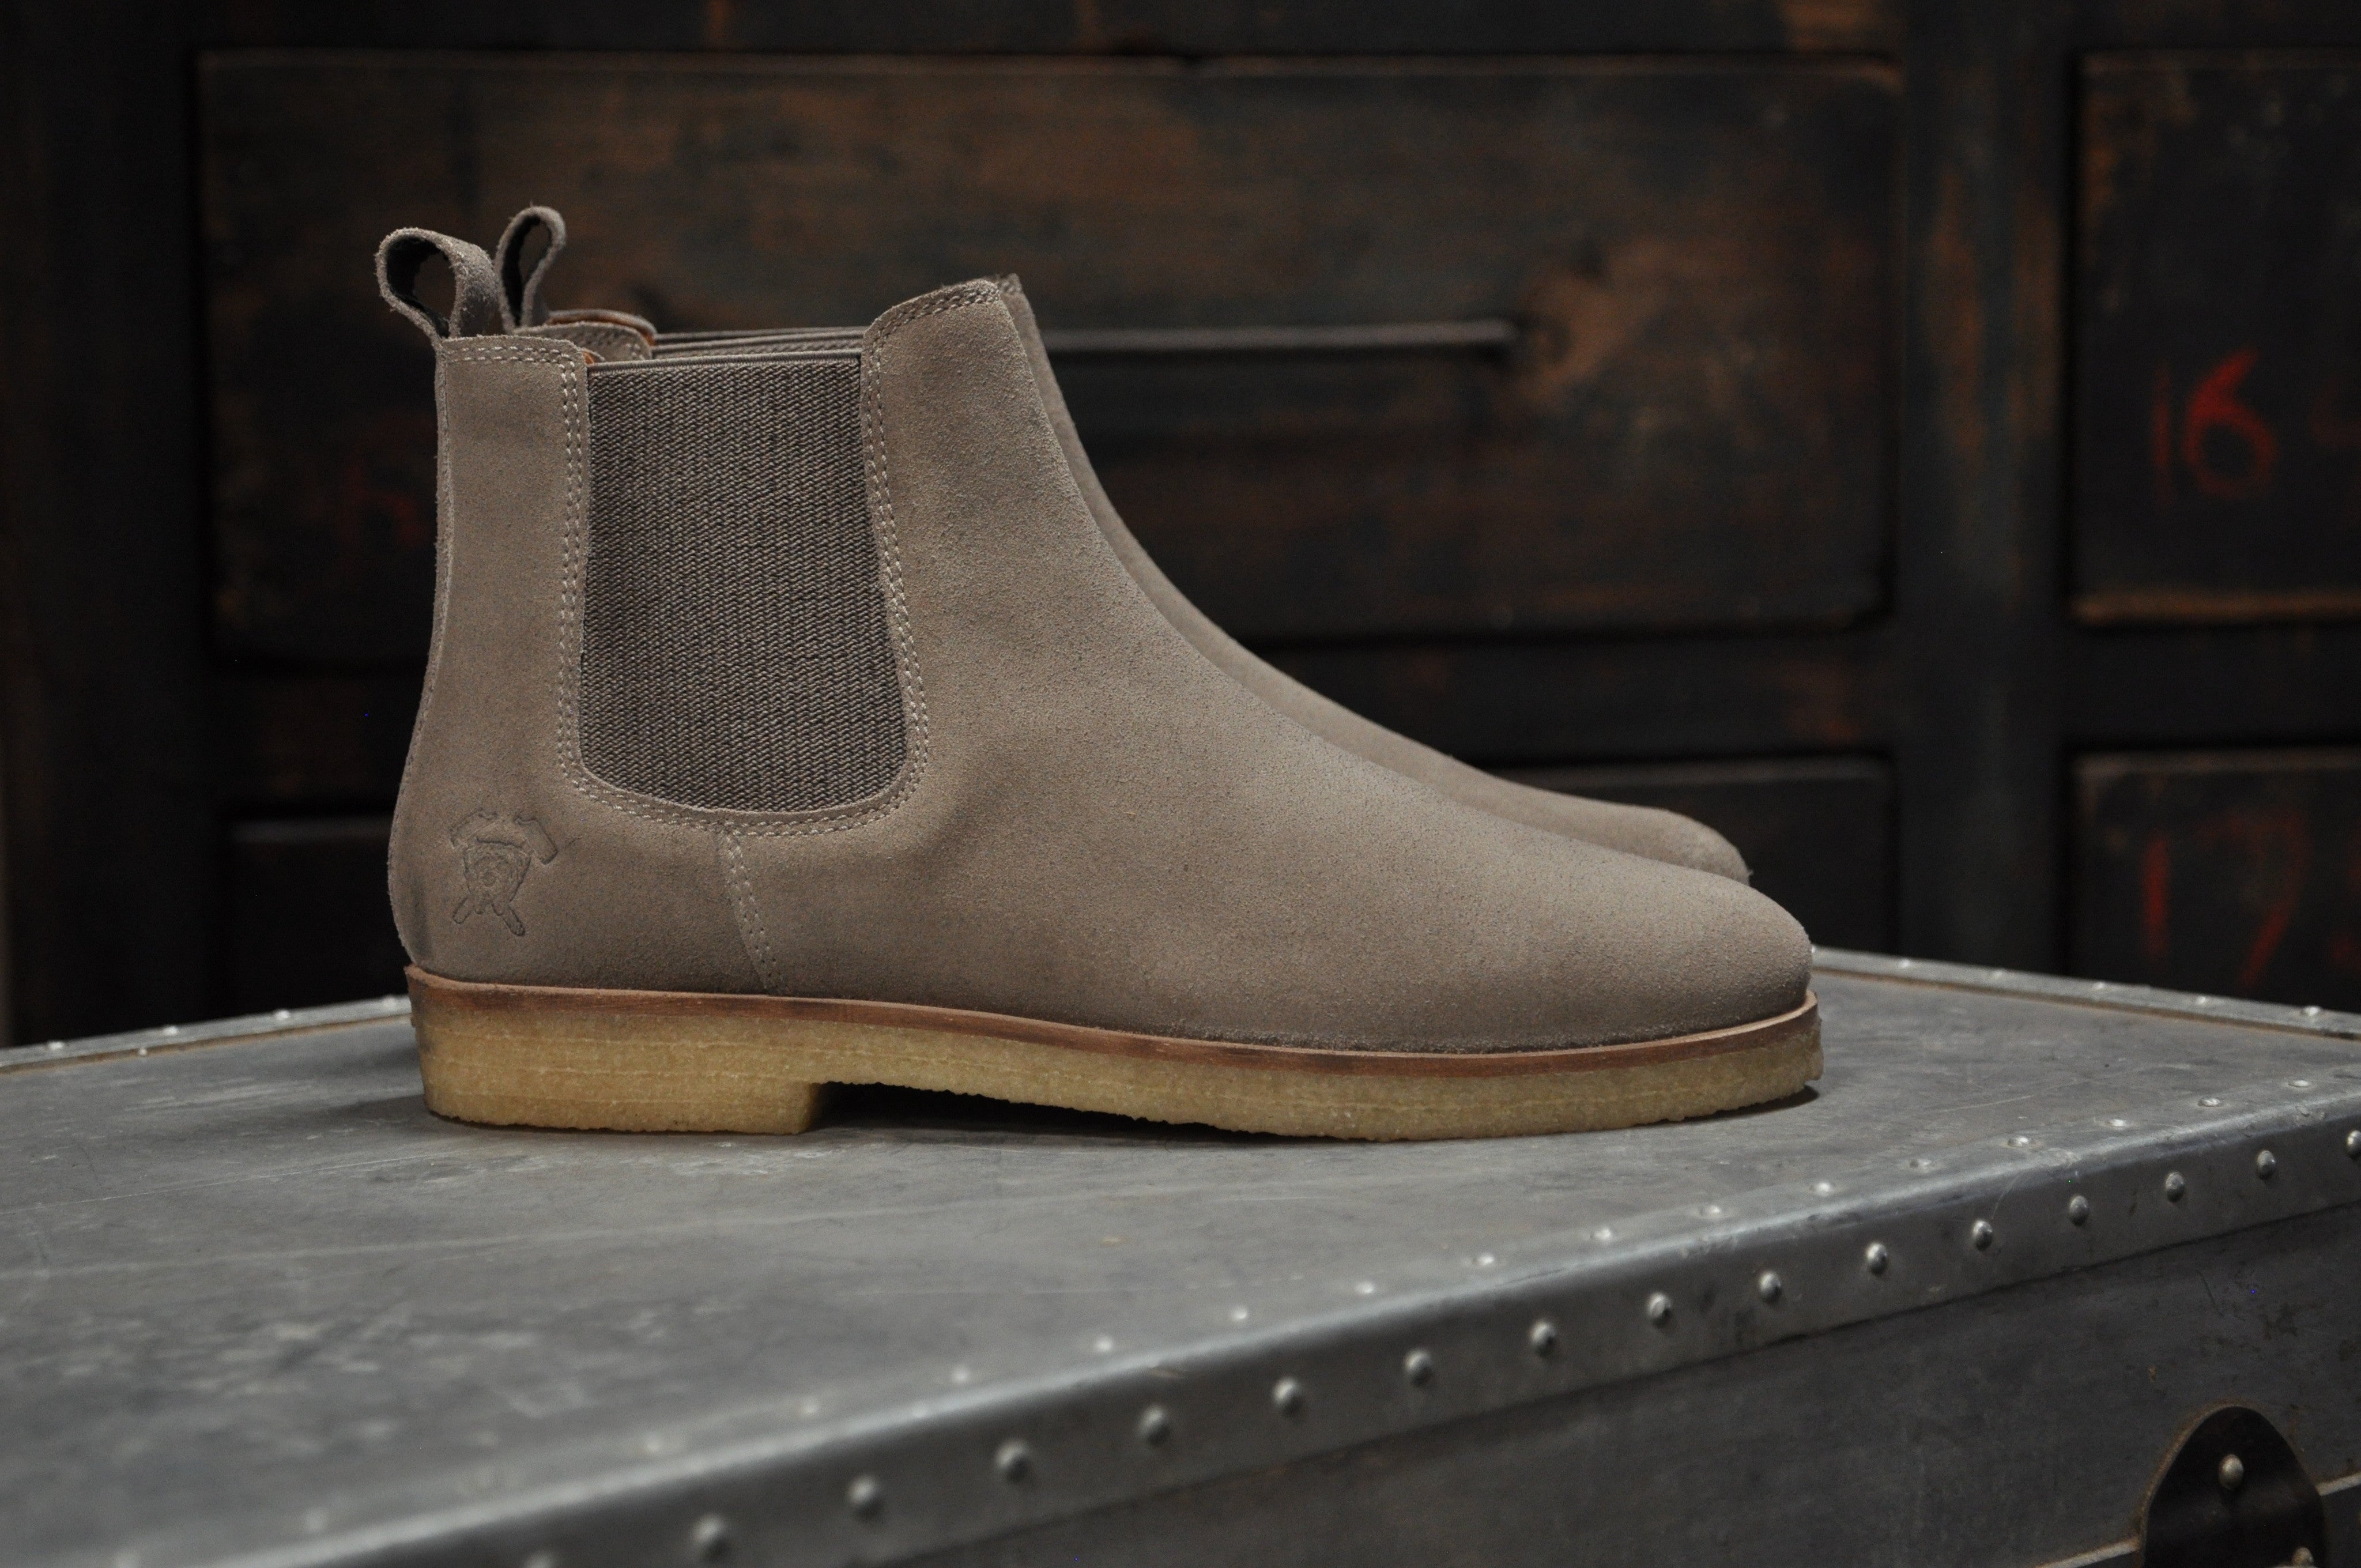 Chelsea Boot - The Maddox Mens Boot Black Suede - Hound and Boots